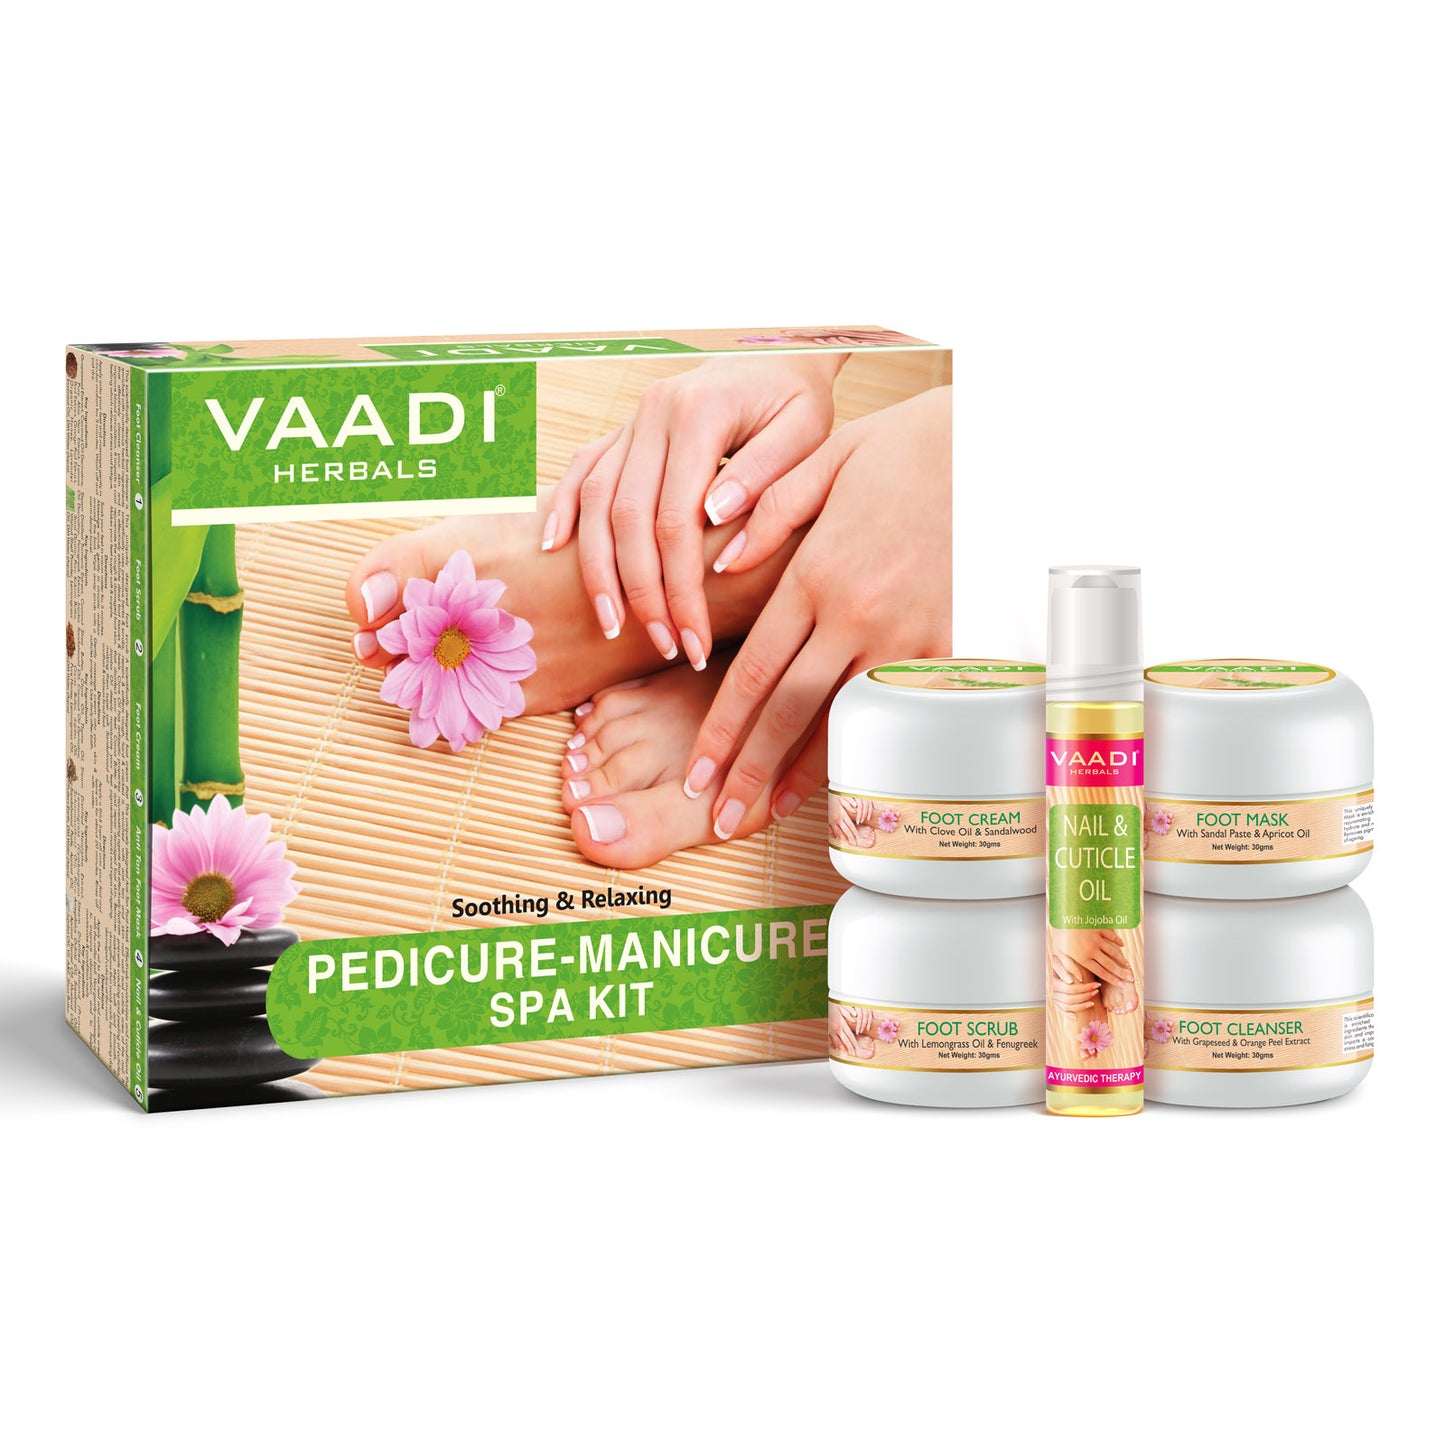 Pedicure Manicure Spa Kit - Soothing & Refreshing (135 gms)